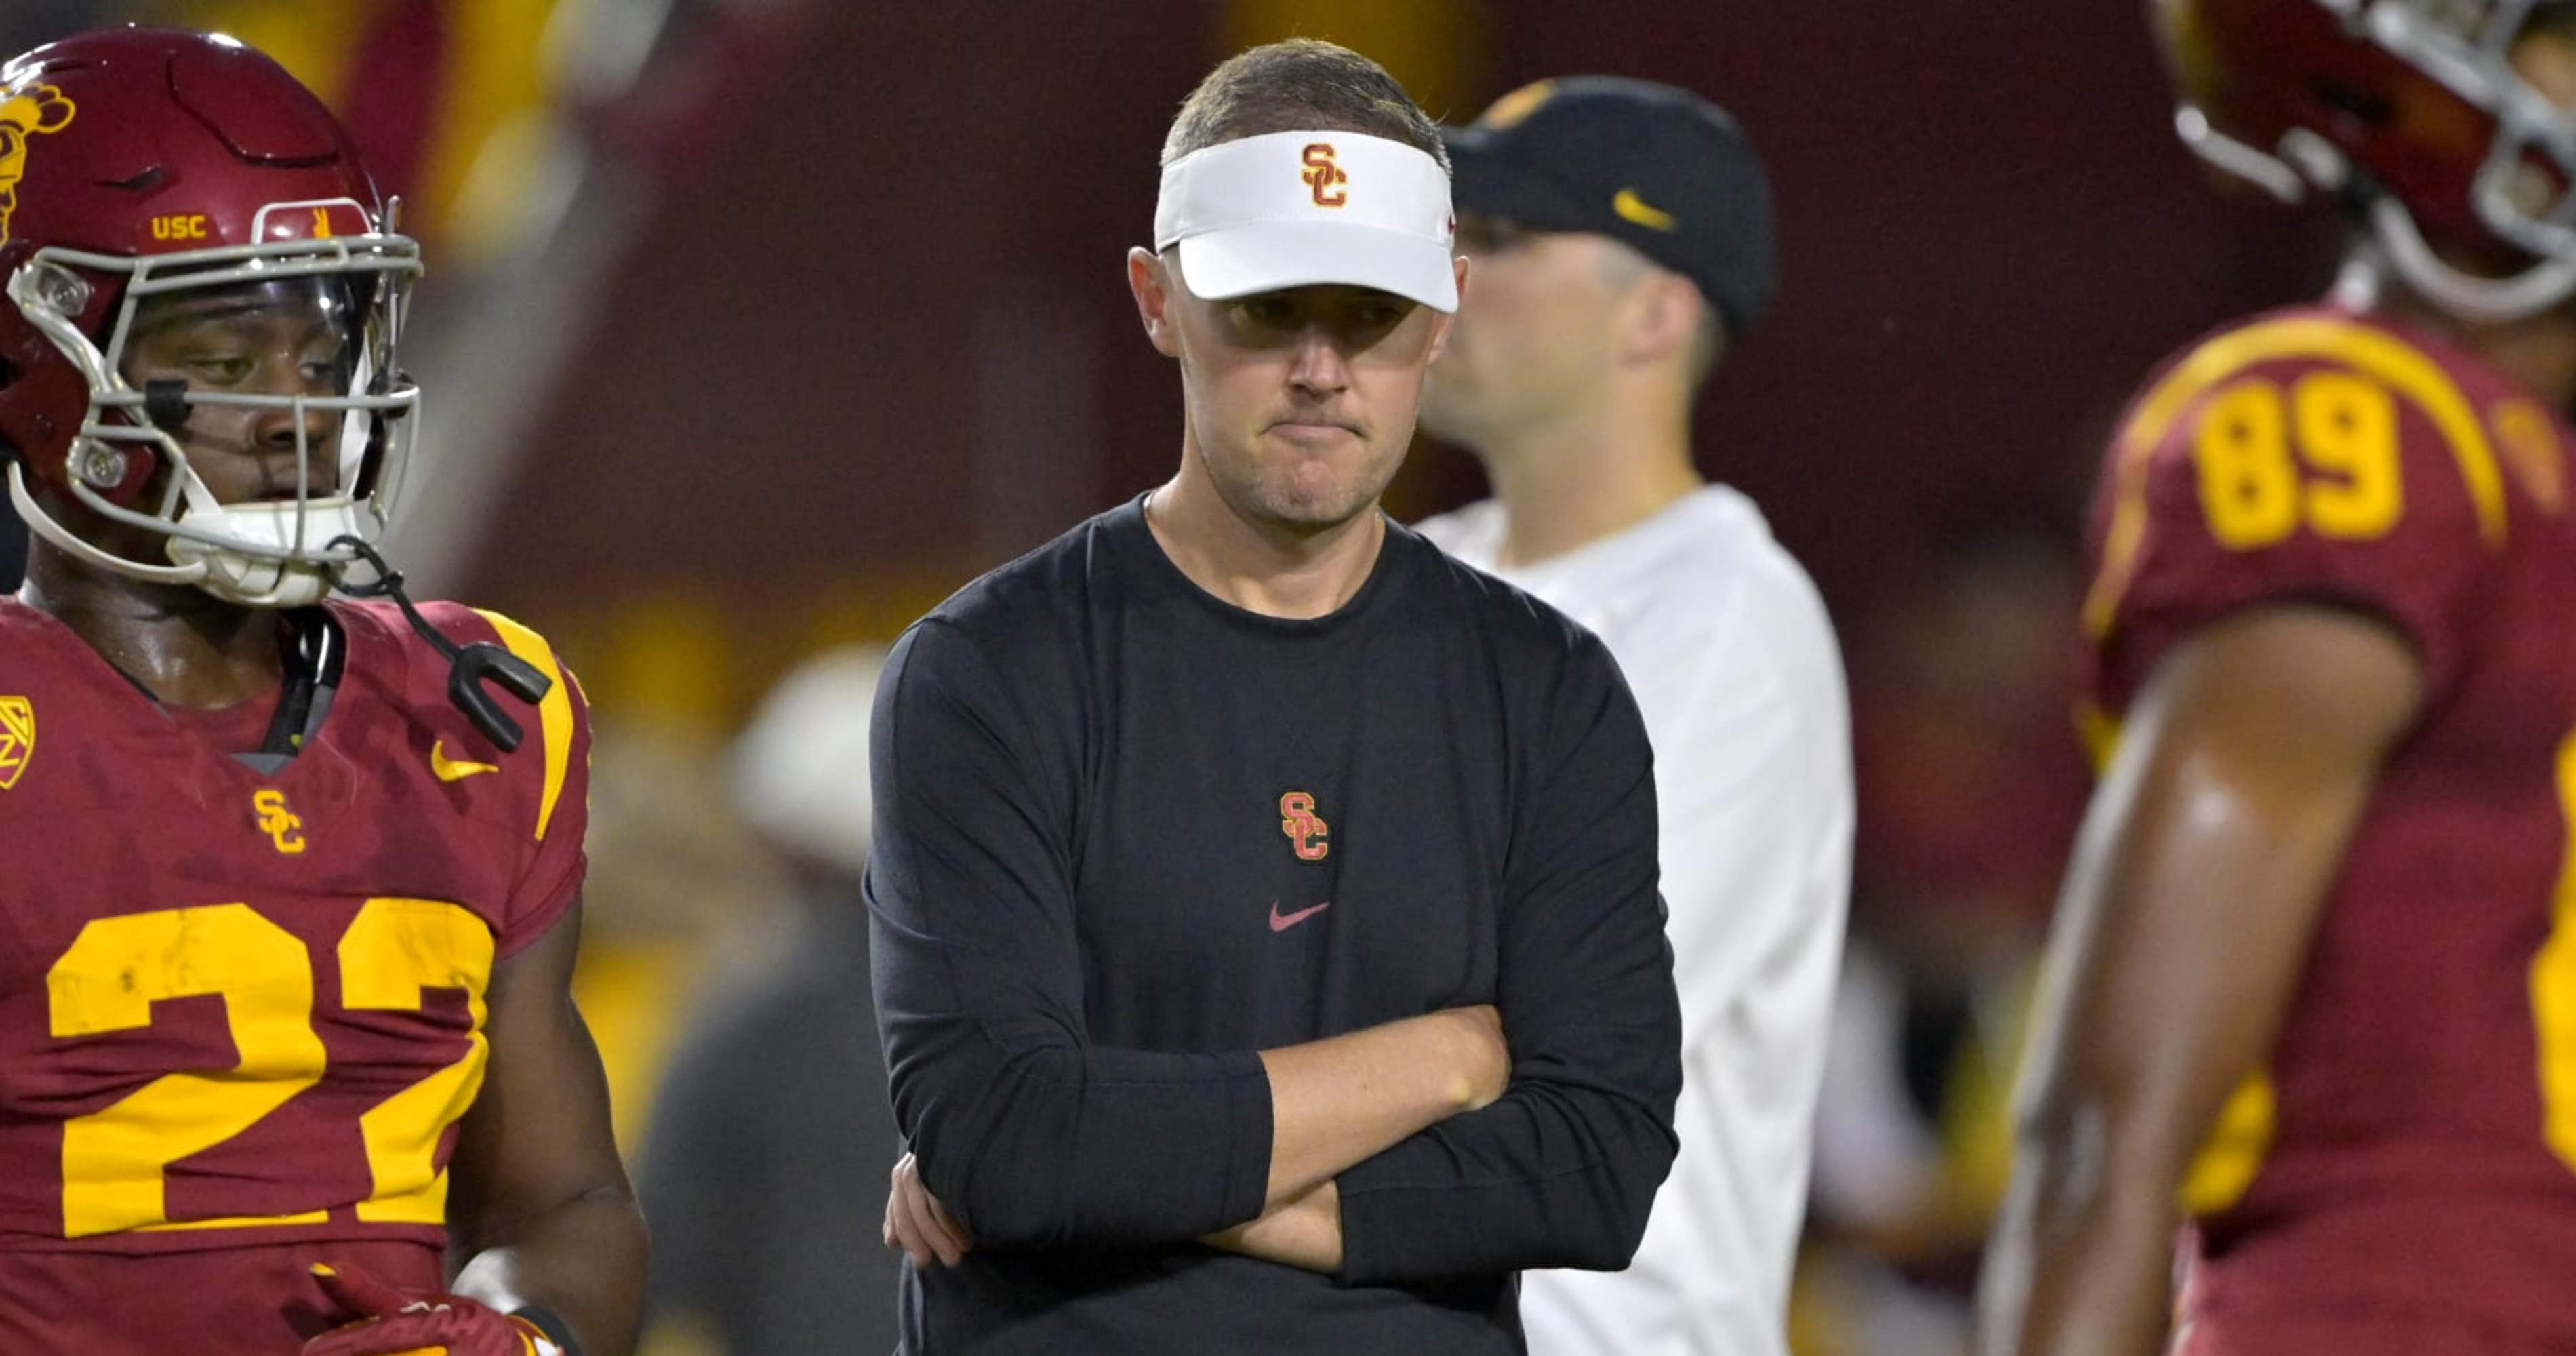 Lincoln Riley Discusses USC Suspending Reporter's CFB Access for Policy Violation